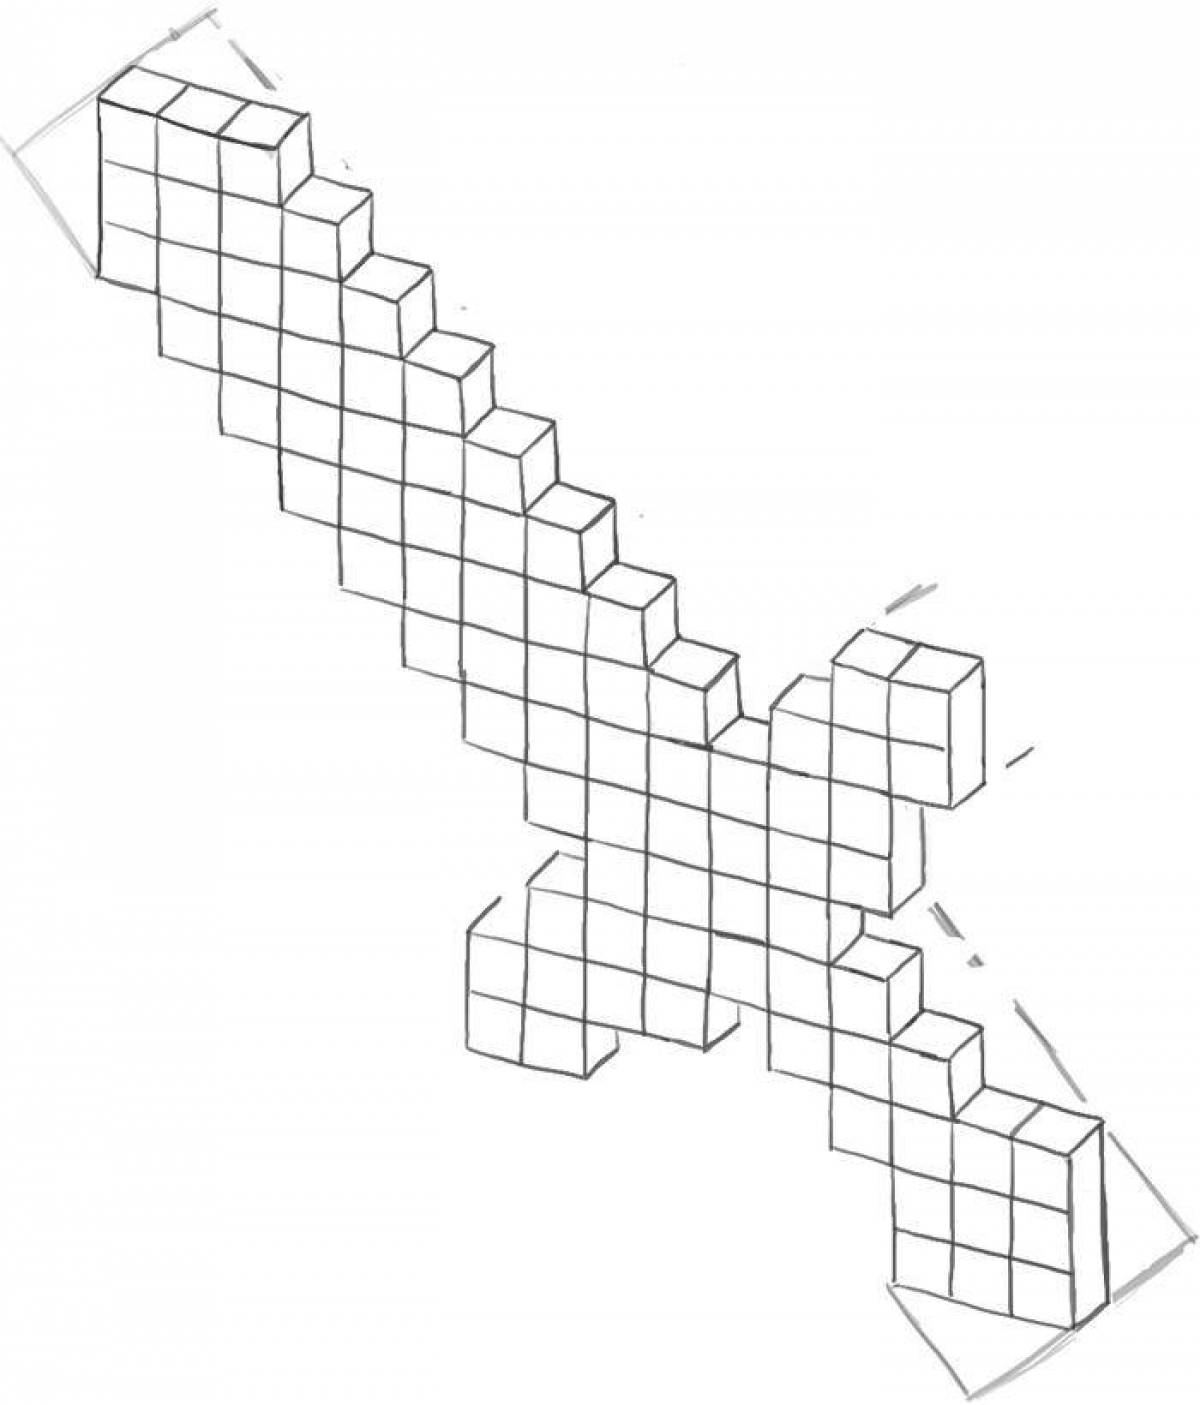 Fascinating minecraft sword coloring page